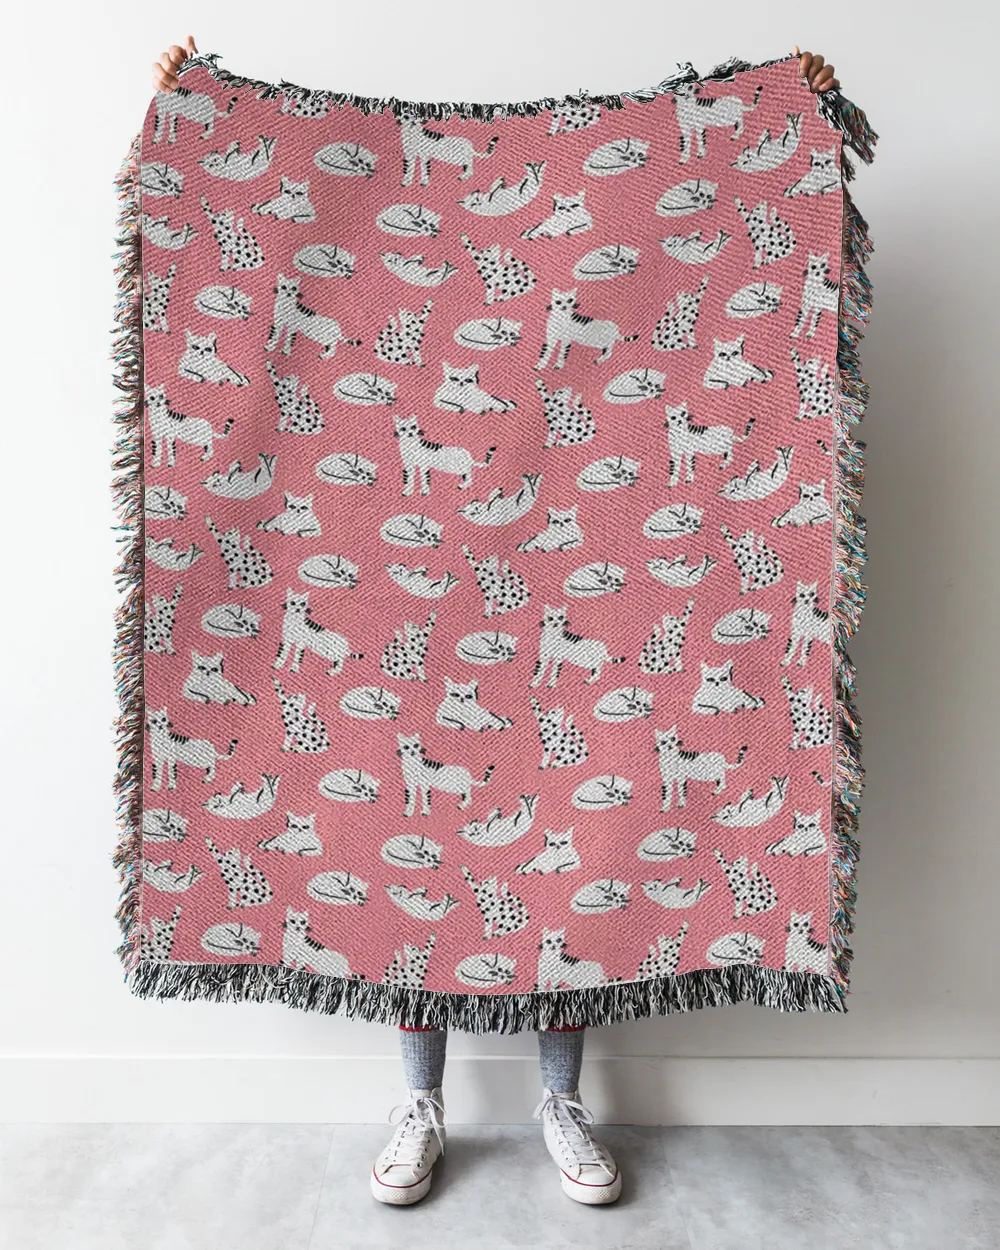 Pink Cat Blanket, Cute Gift For Cat or Pet Lovers, Kitty Decor Blanket